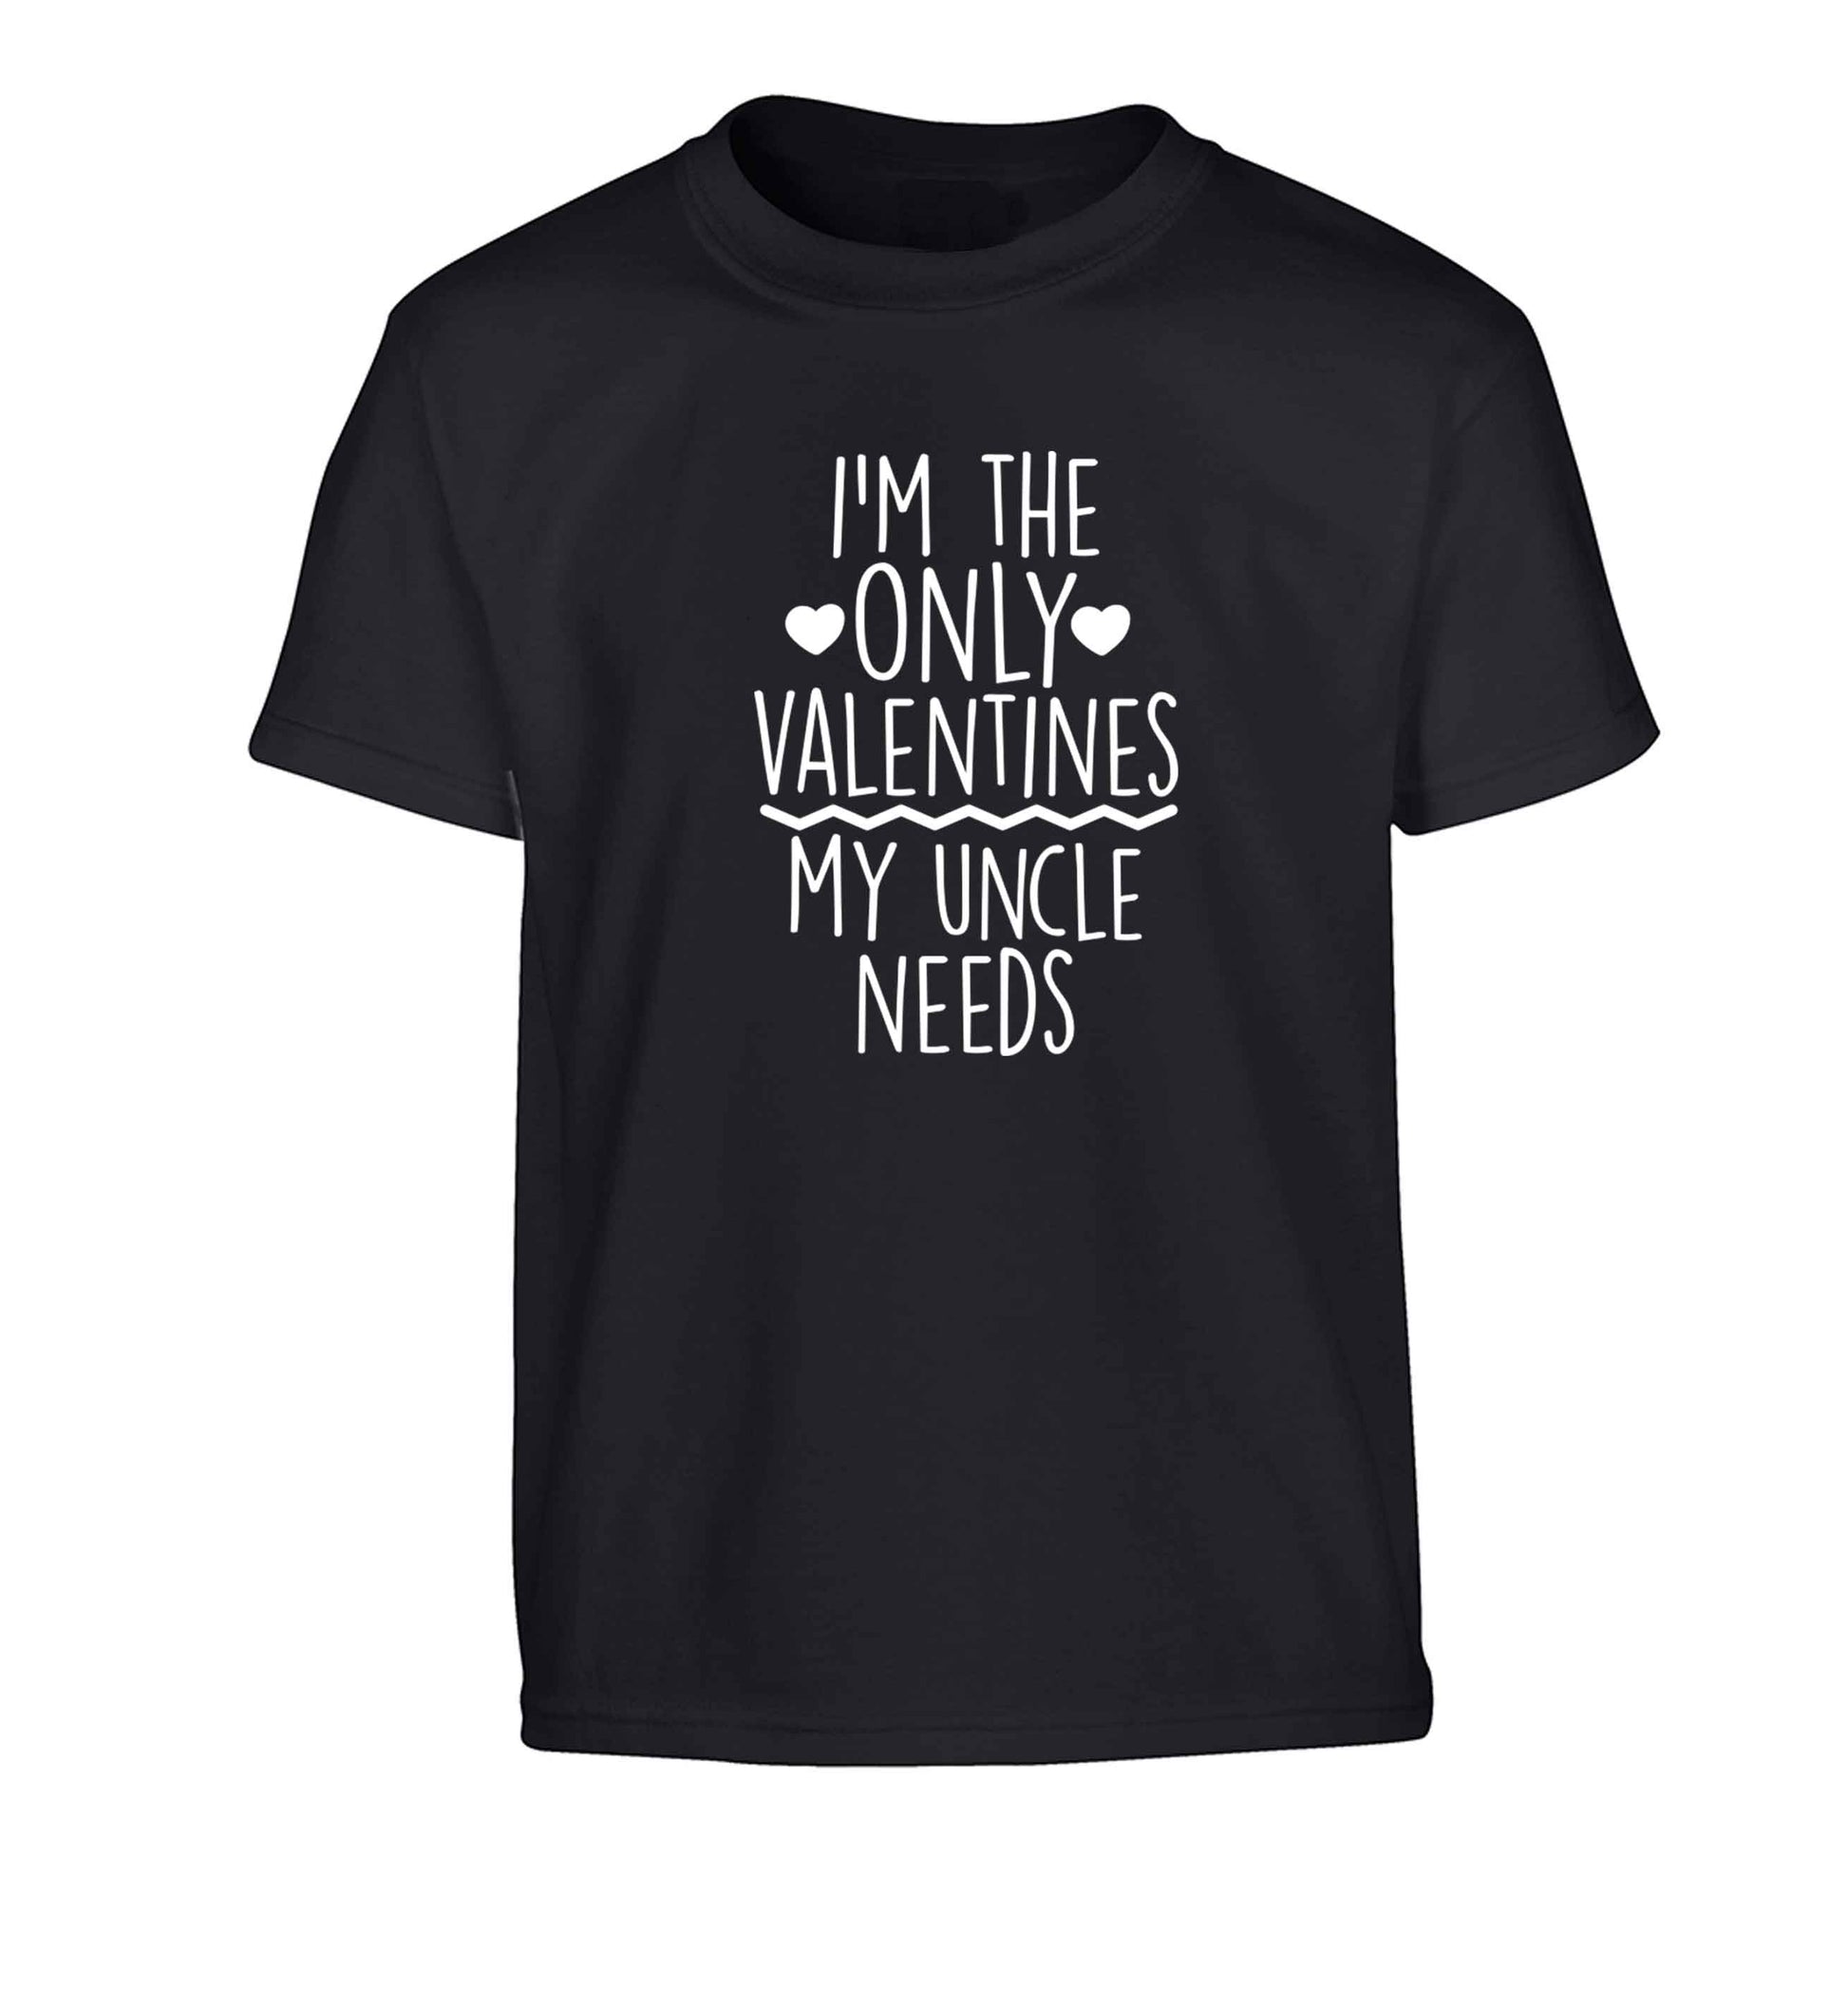 I'm the only valentines my uncle needs Children's black Tshirt 12-13 Years